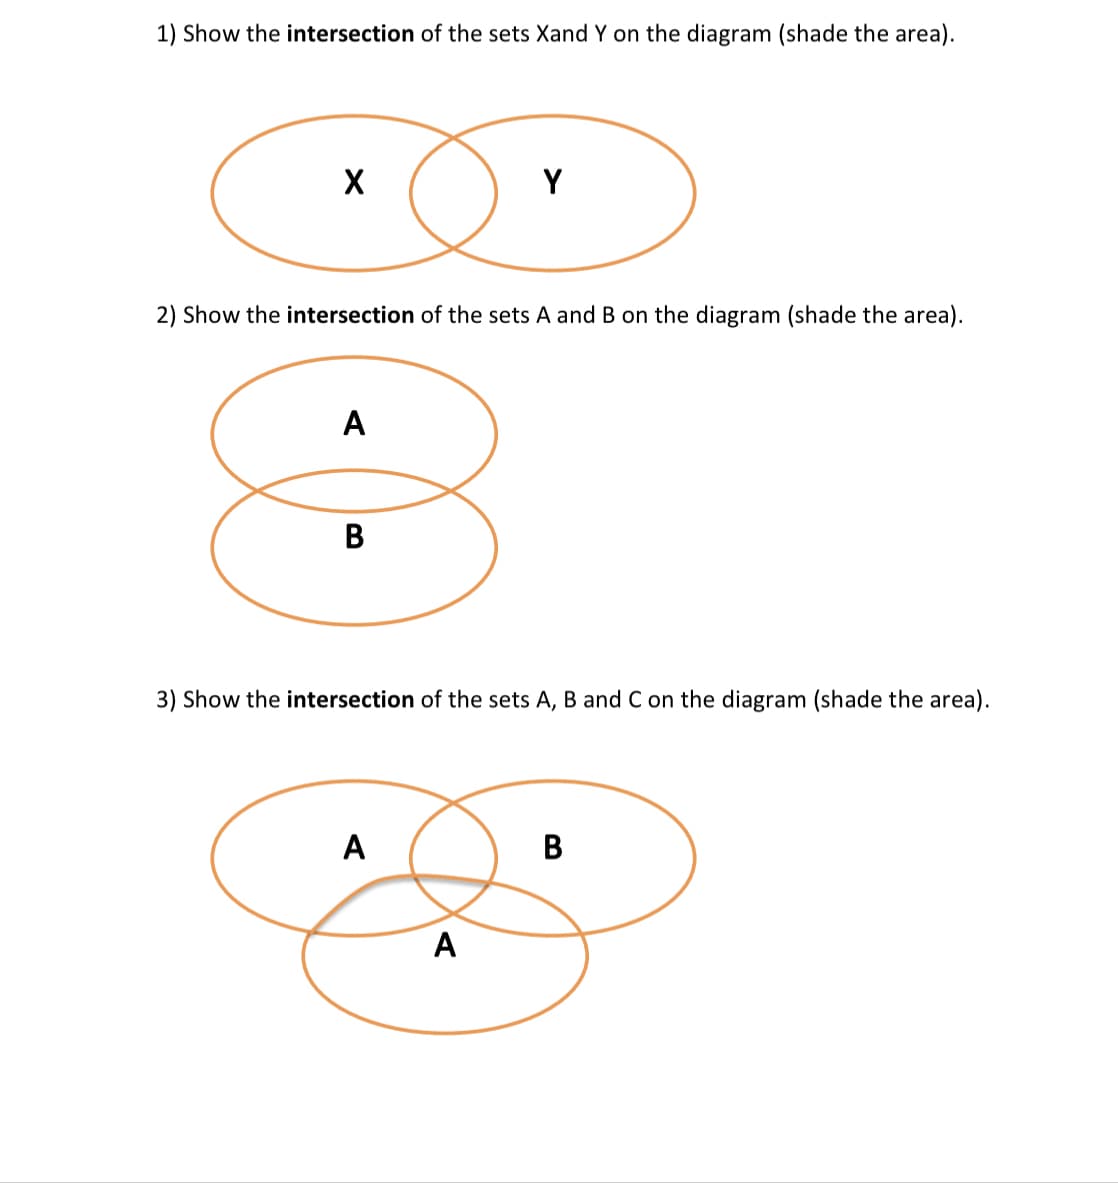 1) Show the intersection of the sets Xand Y on the diagram (shade the area).
X
2) Show the intersection of the sets A and B on the diagram (shade the area).
A
8
Y
3) Show the intersection of the sets A, B and C on the diagram (shade the area).
A
A
B